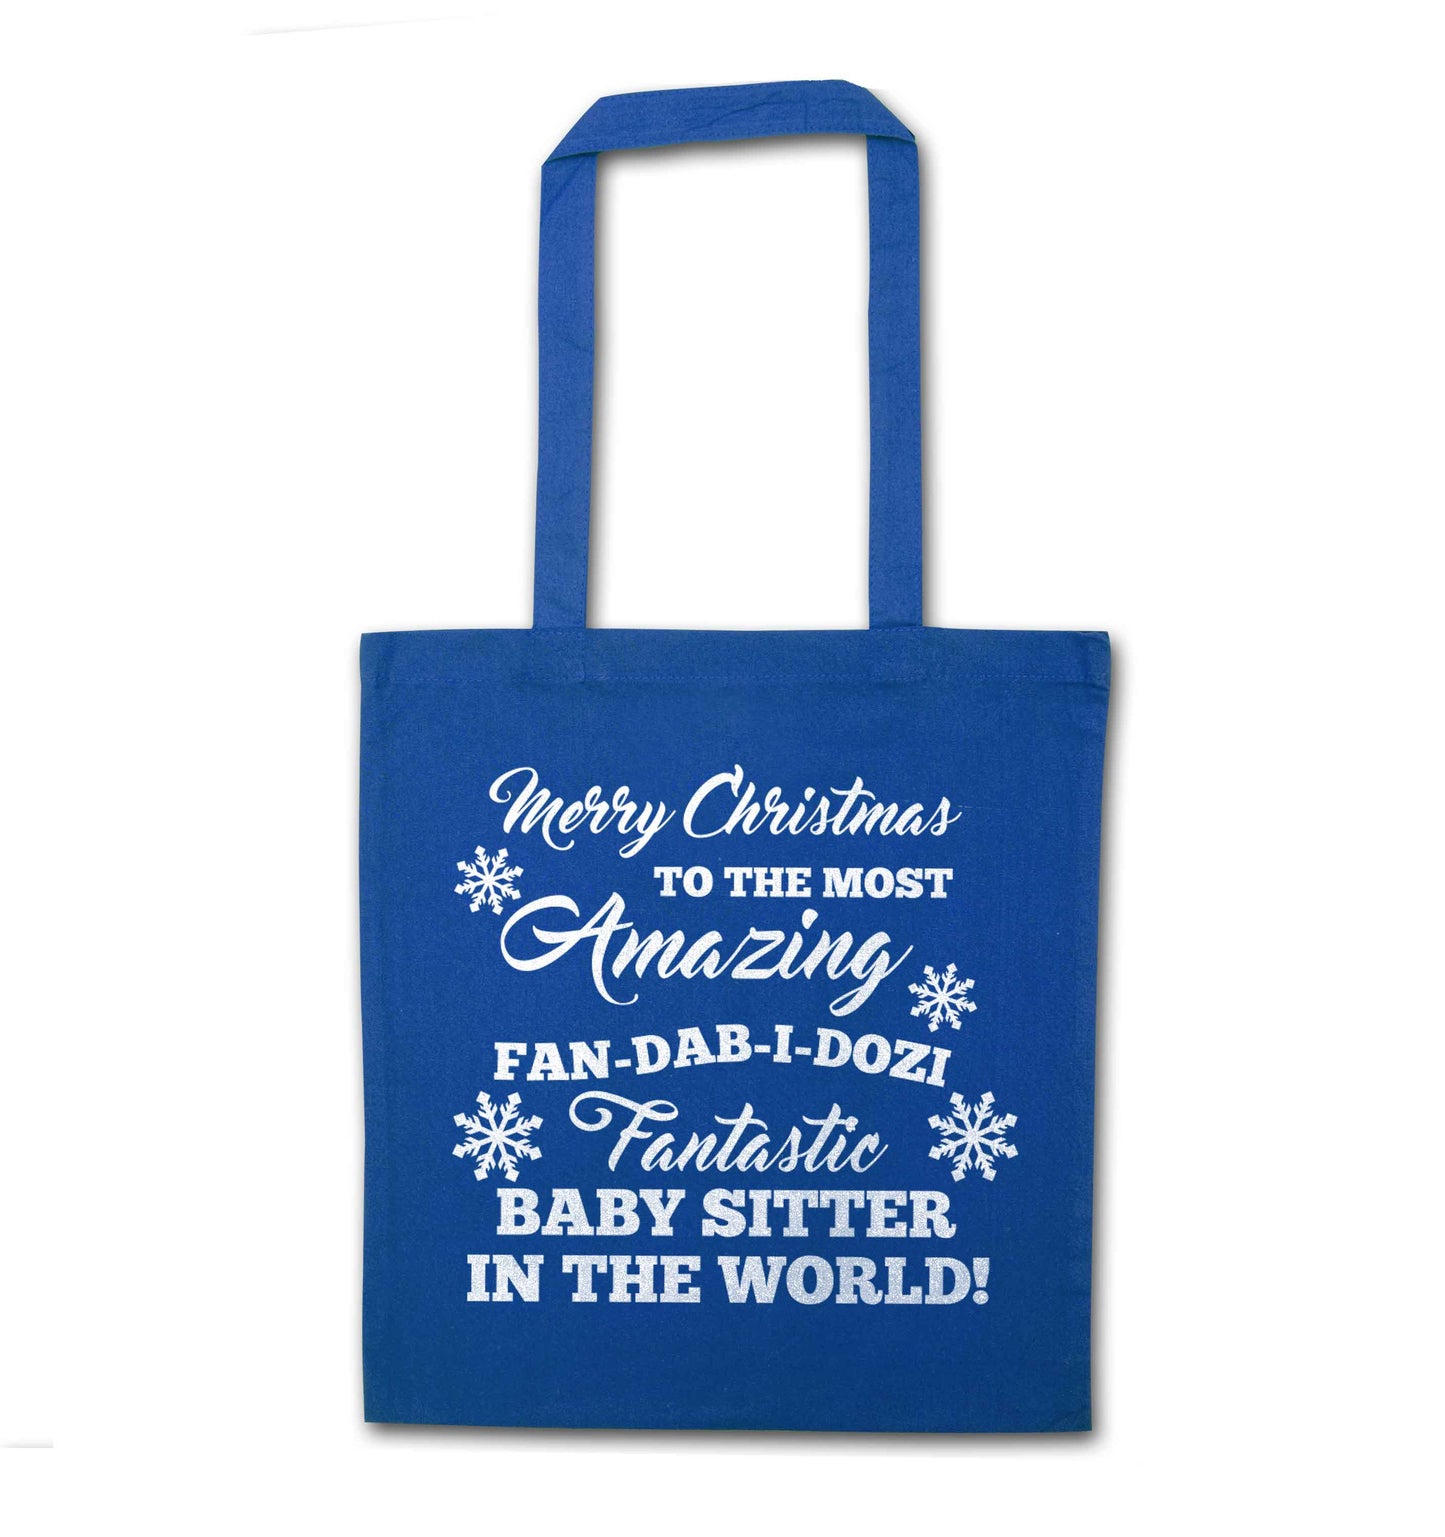 Merry Christmas to the most amazing fan-dab-i-dozi fantasic baby sitter in the world blue tote bag